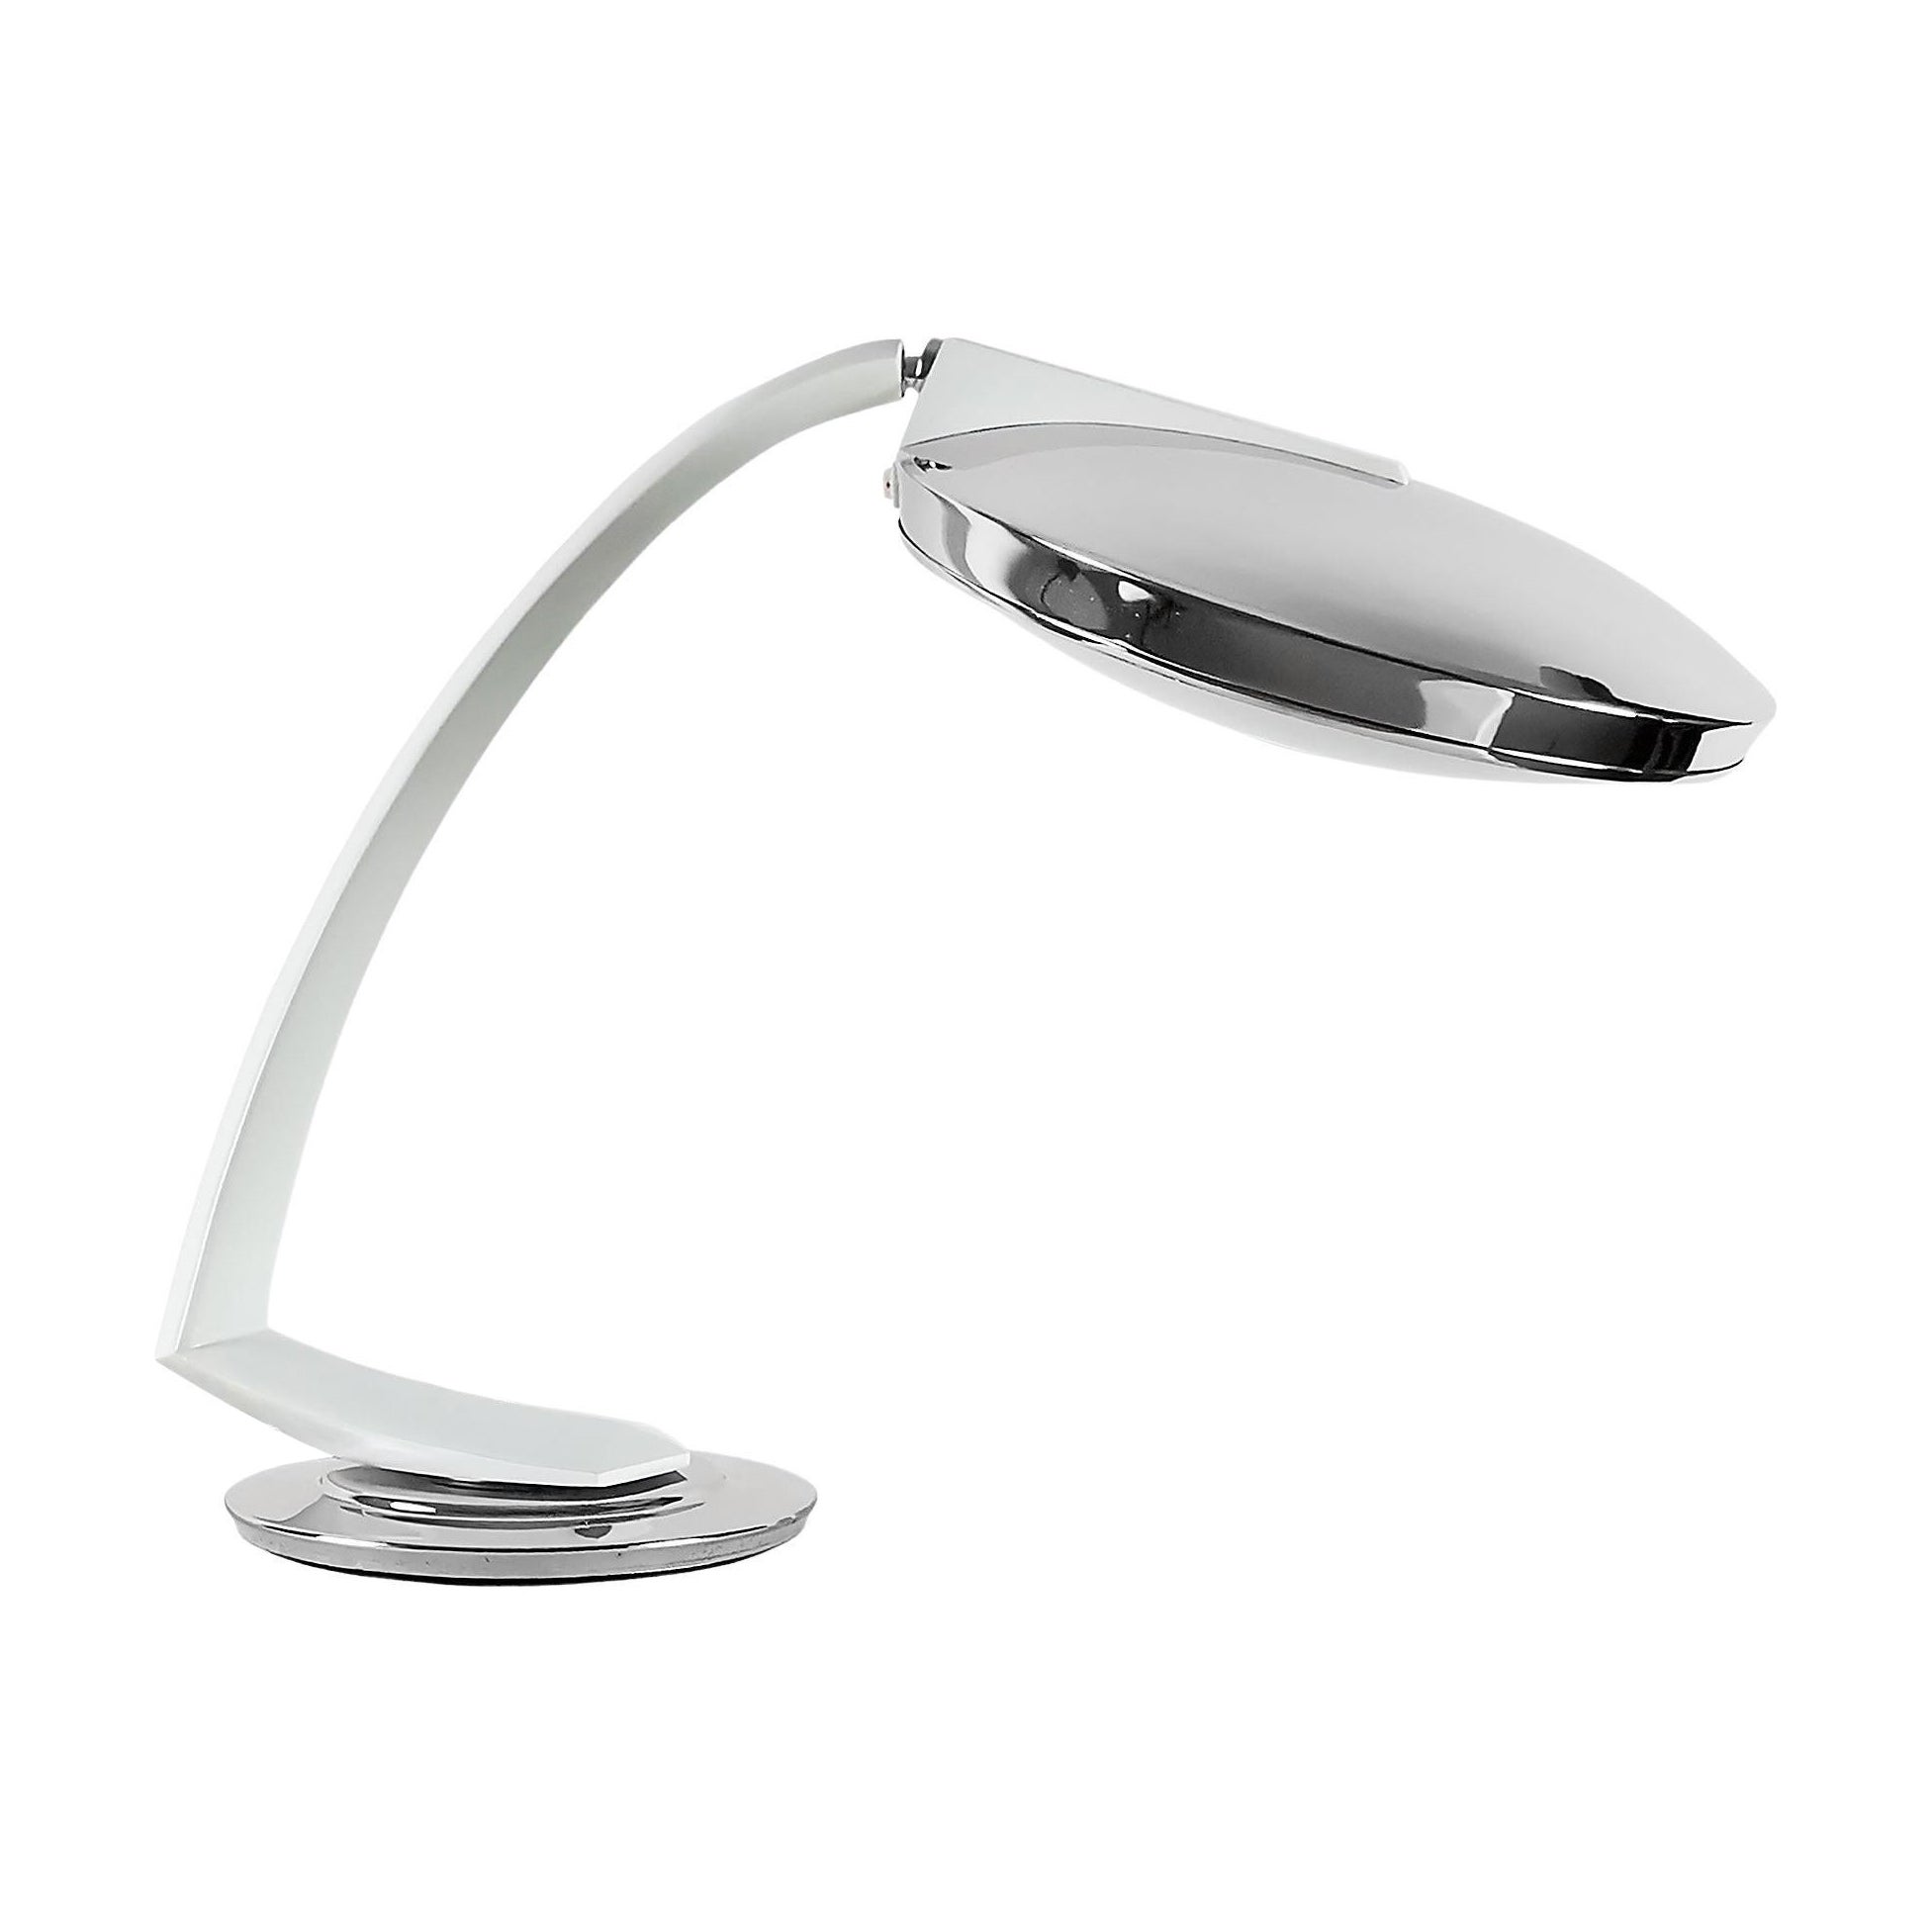 1970's Large "Boomerang" Desk Lamp by Fase, Steel, Frosted Glass - Spain